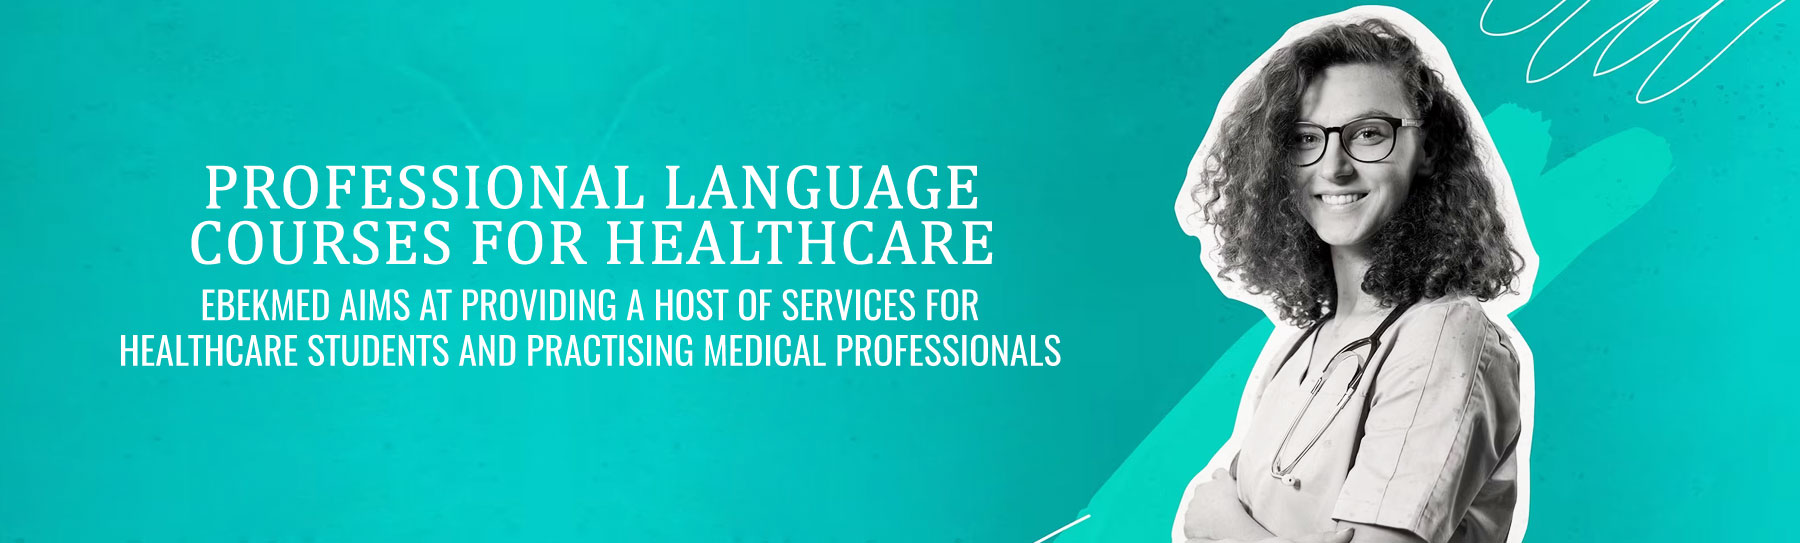 Professional Language Courses for Healthcare